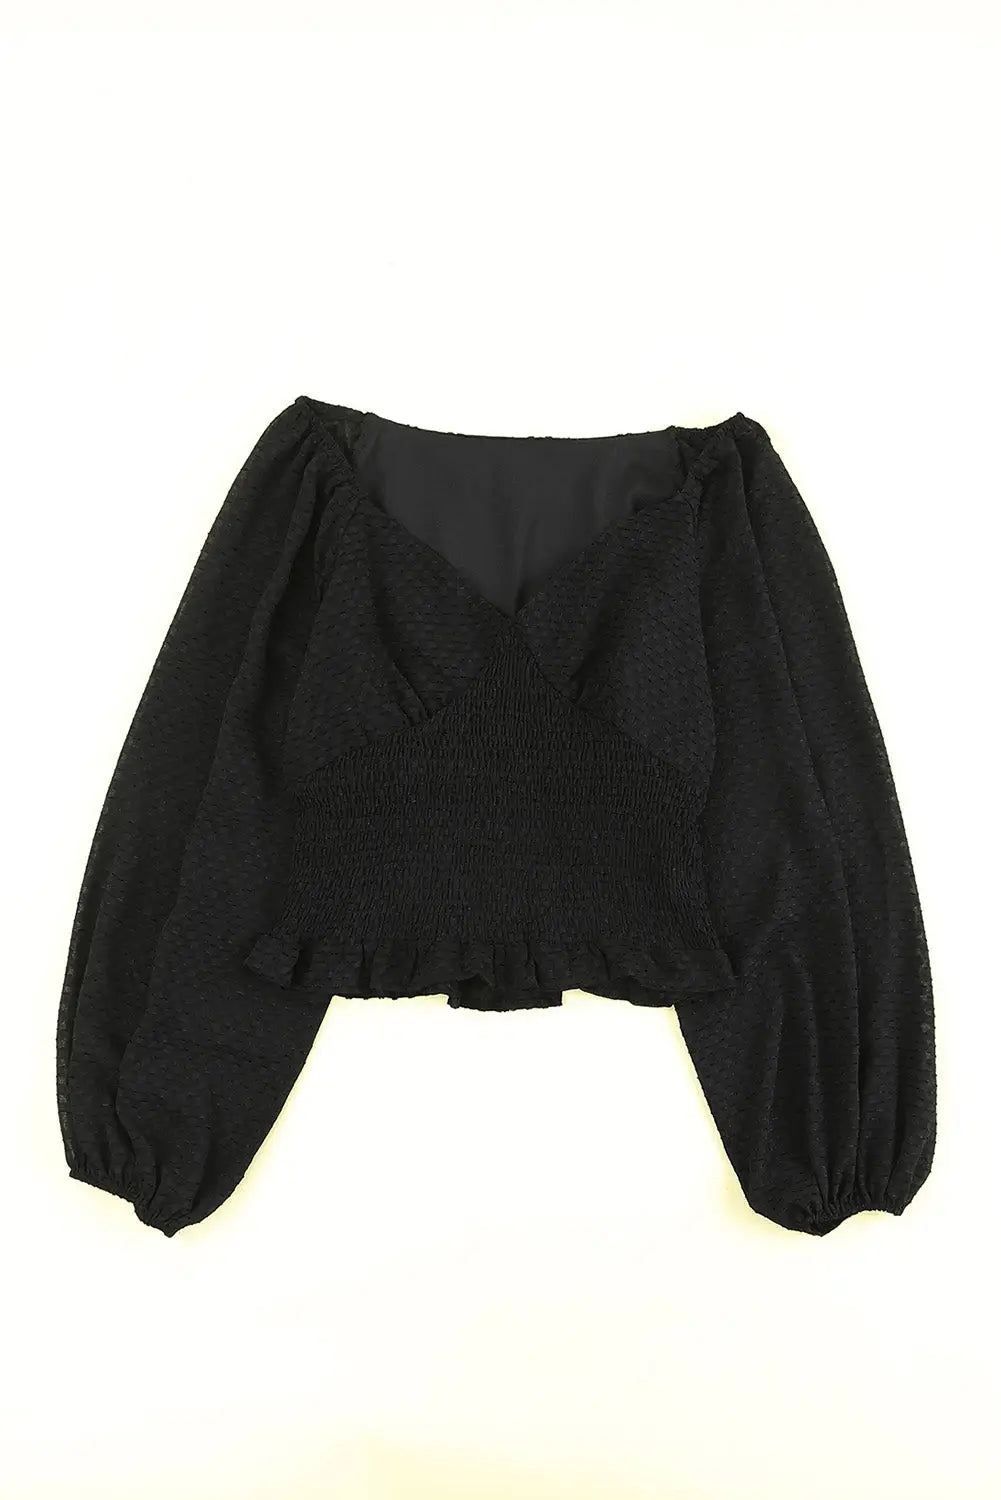 Black long sleeve smocked top - 2xl / 100% polyester - t-shirts